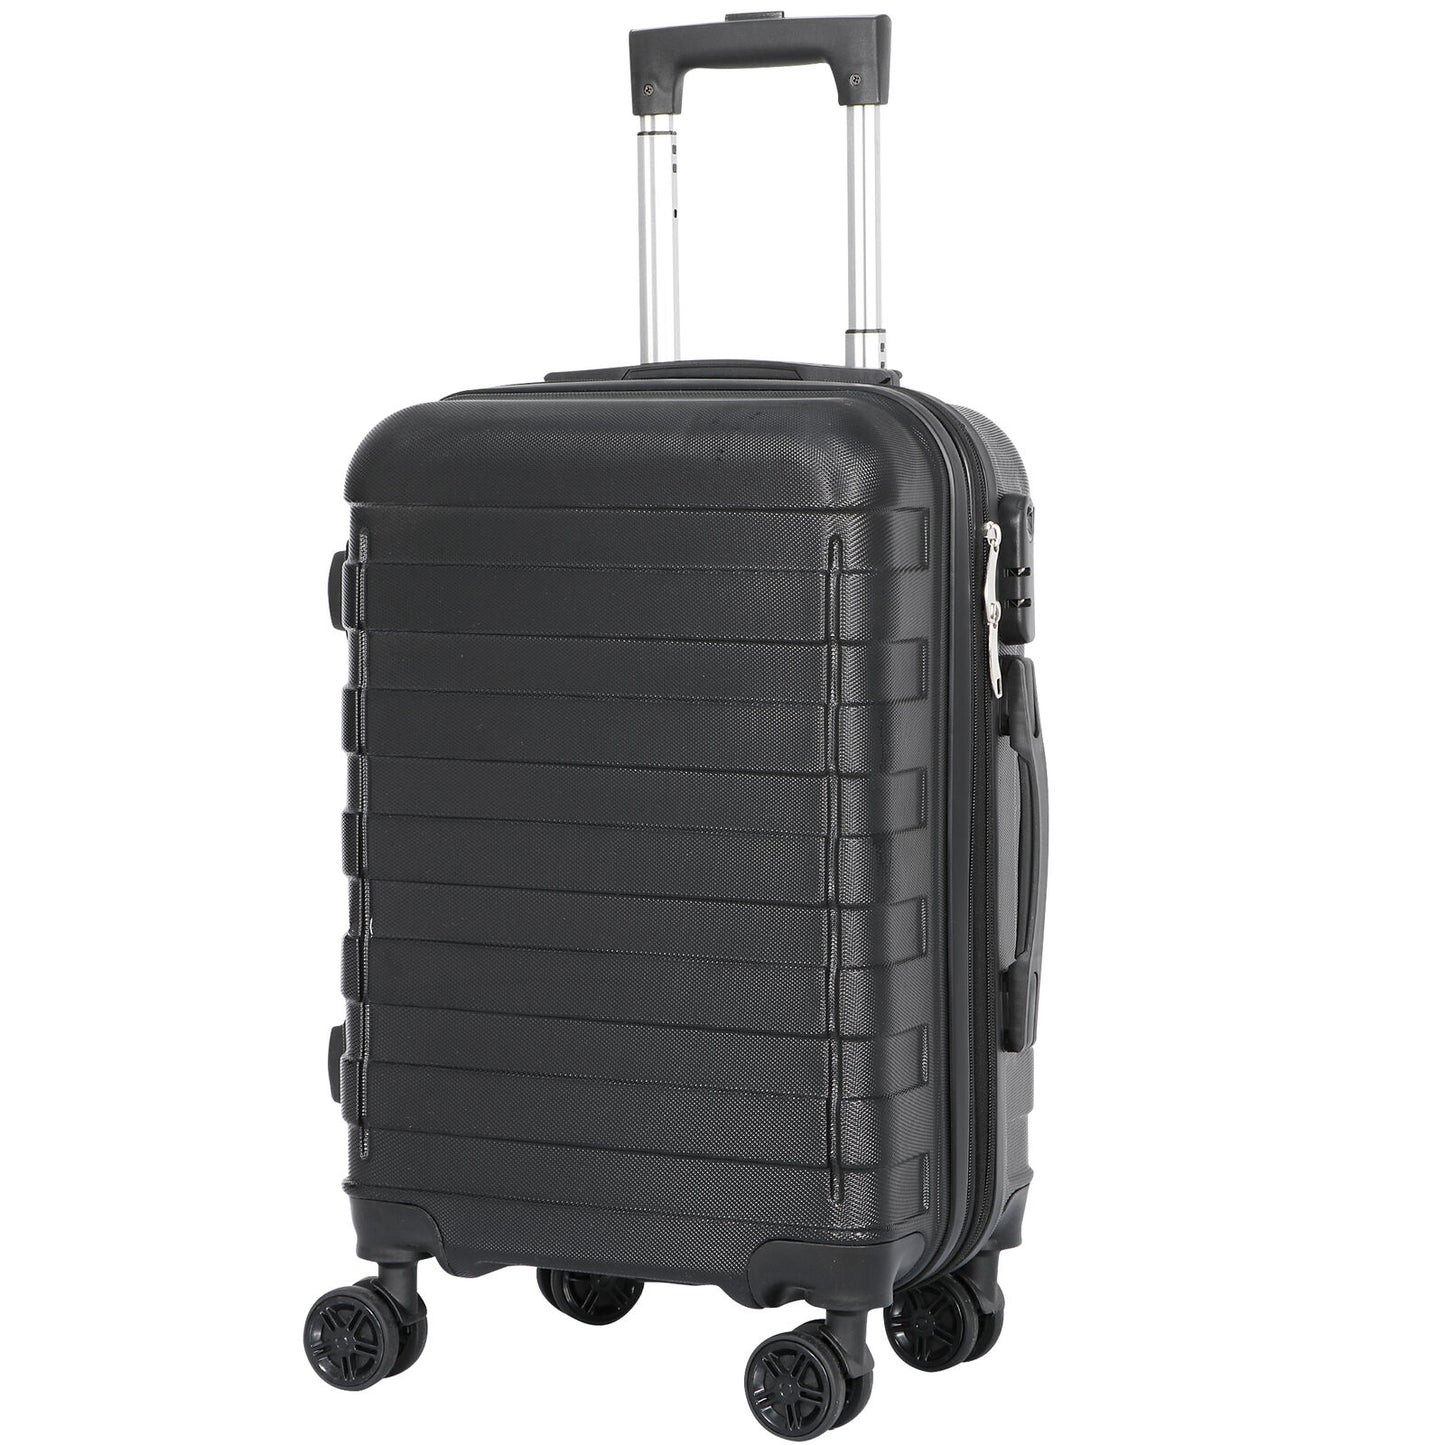 21" Hardside Carry On Luggage Suitcase Travel Bag Trolley Spinner W/wheels Black